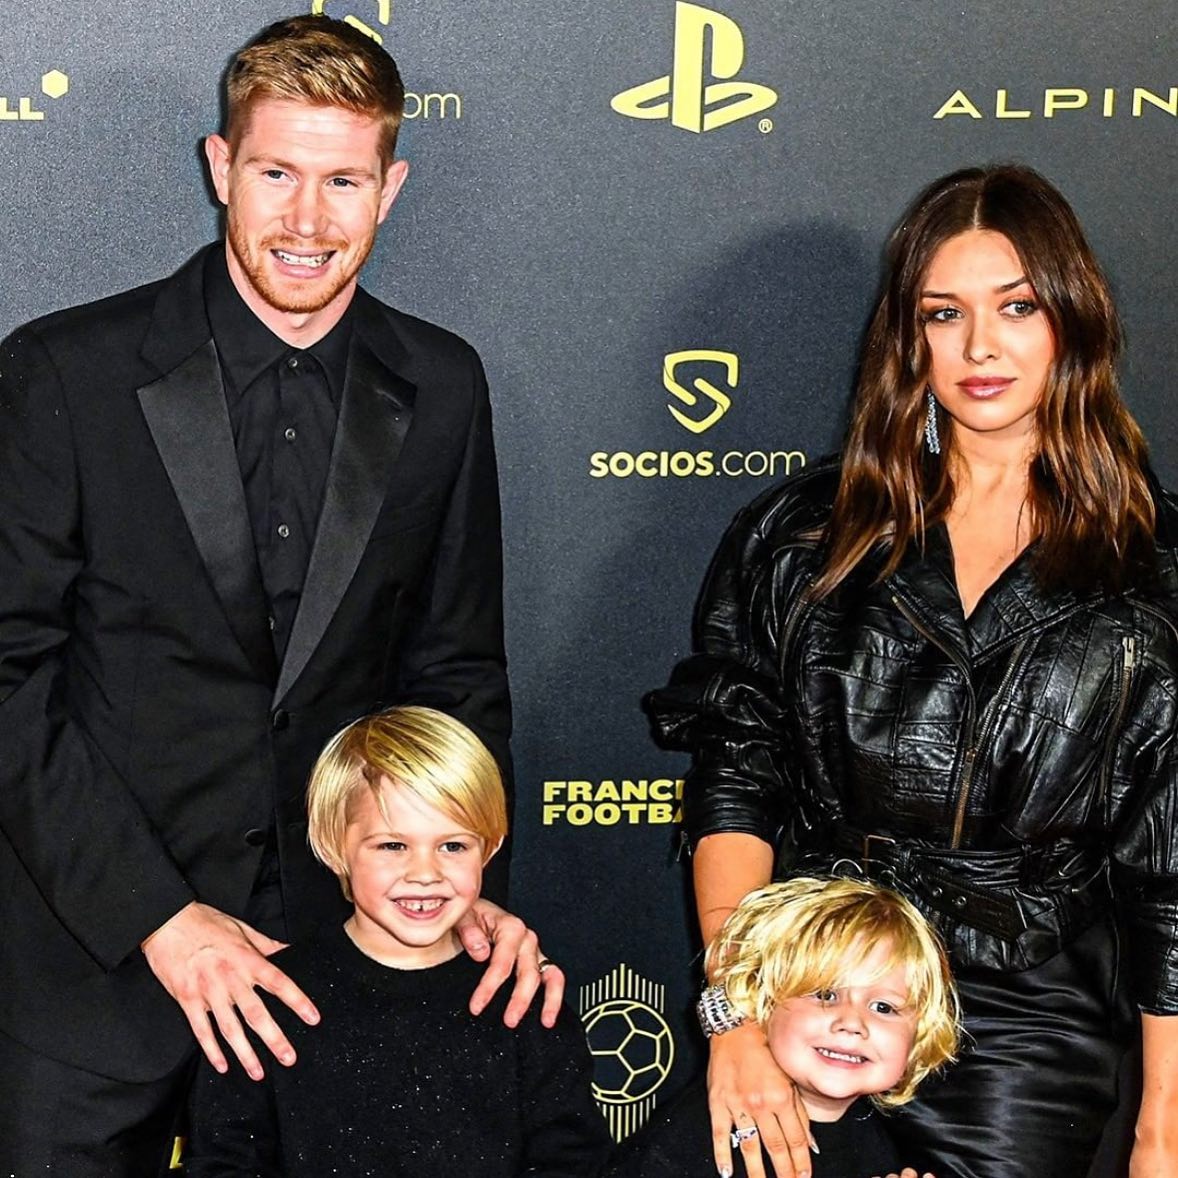 Kevin De Bruyne's Wife, Michele Lacroix Biography: Age, Brother, Net Worth, Height, Children, Work